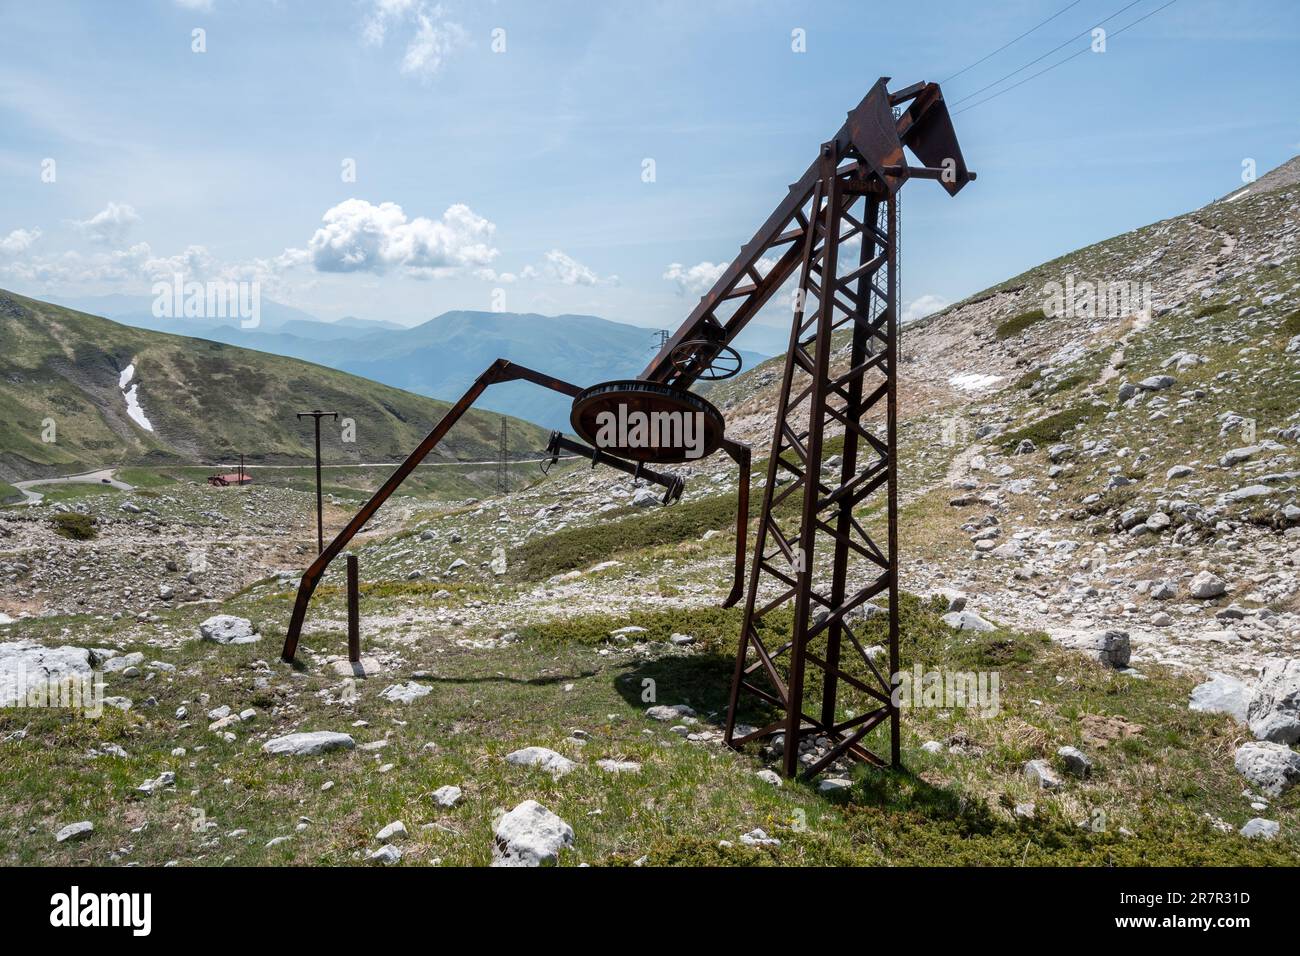 Old disused and rusty ski lift on Monte Terminillo in the Apennines, Lazio, Italy, Europe. Theme, global warming, climate change Stock Photo